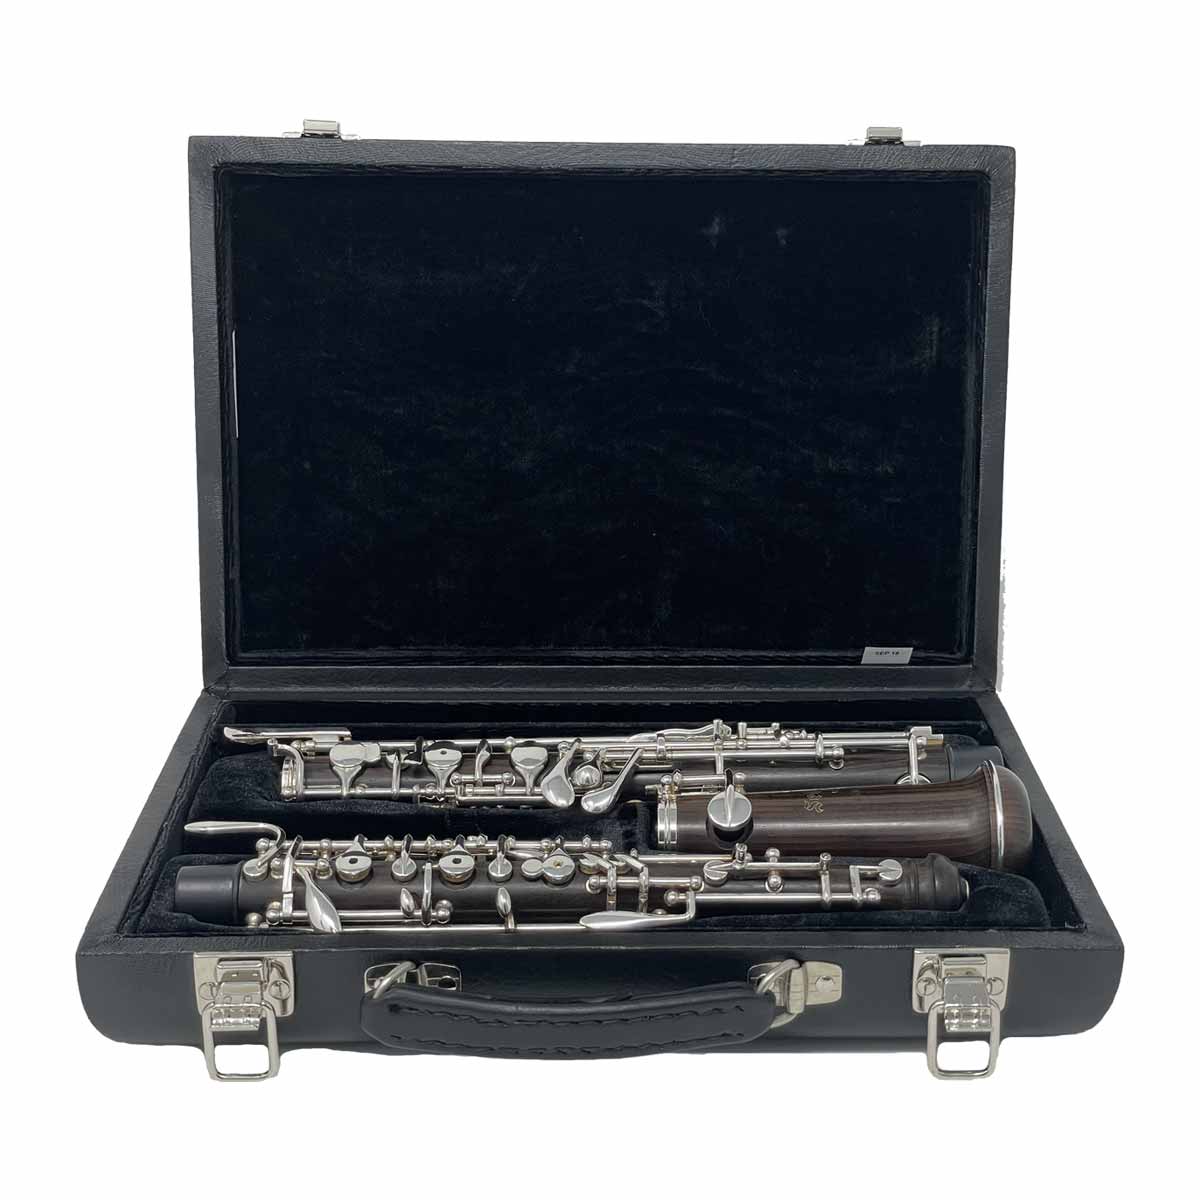 B-Stock Selmer 122F Grenadilla Wood Oboe With Case-Andy's Music